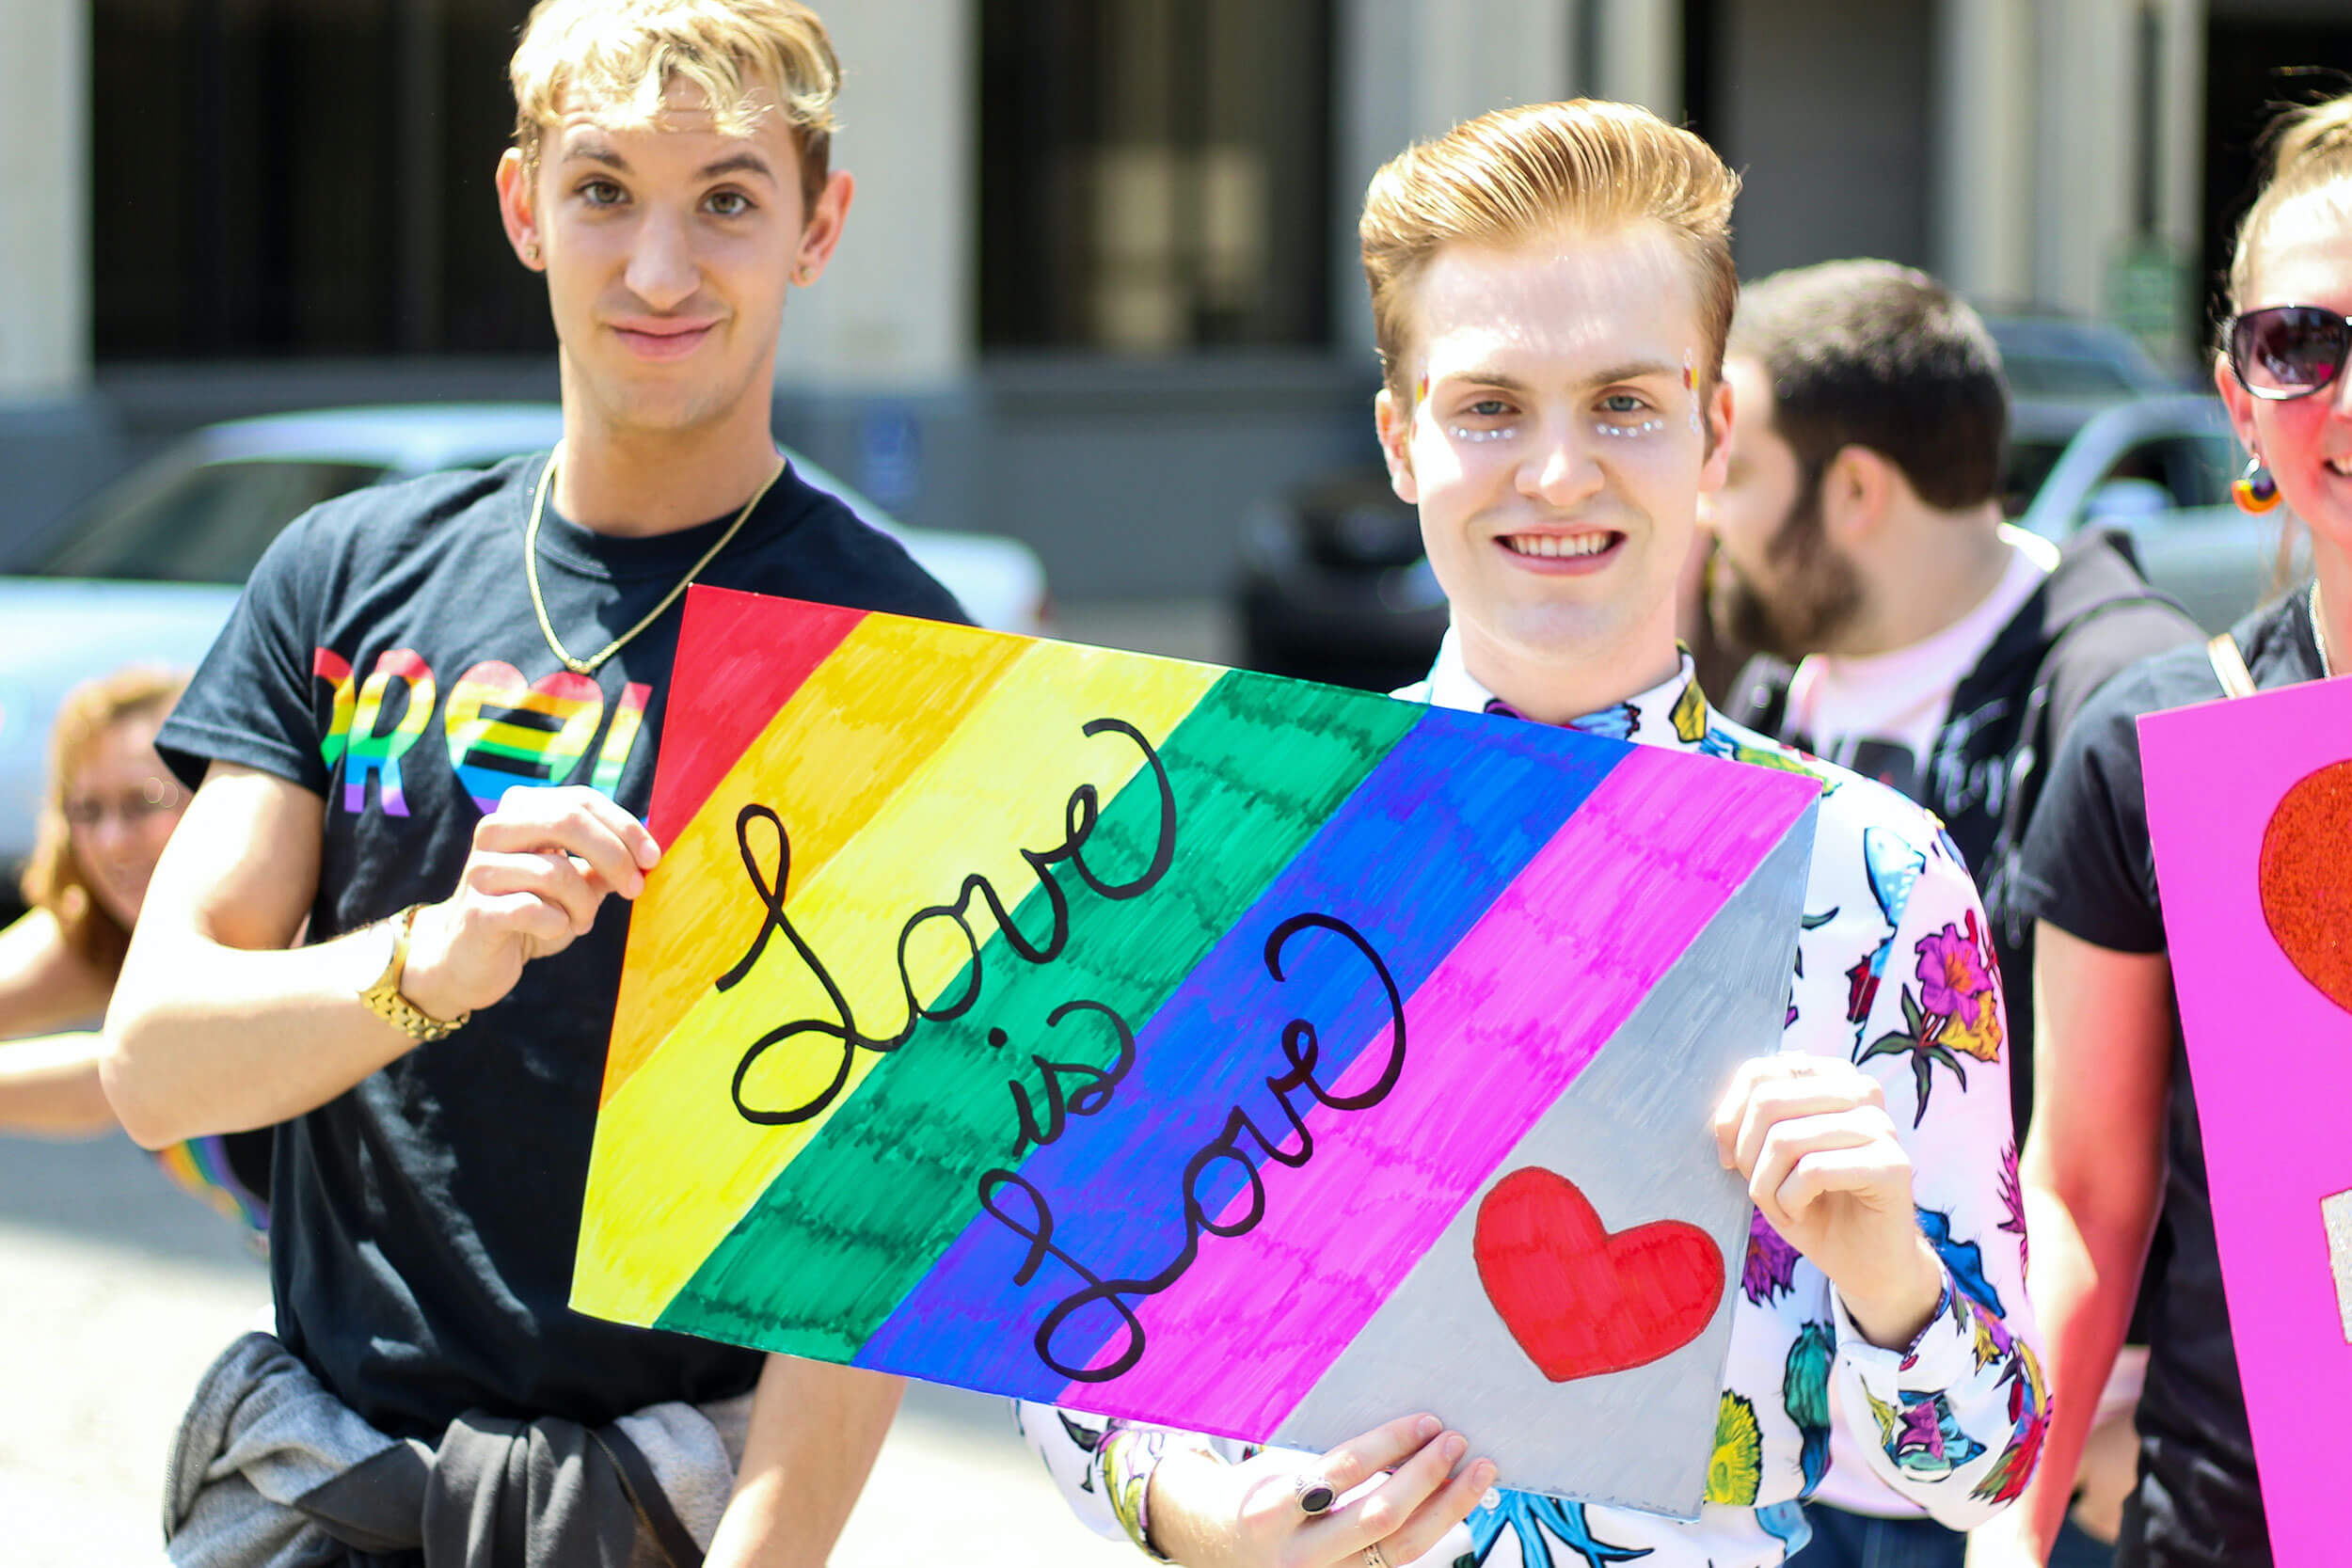 Two people hold a rainbow sign which states "Love is Love."